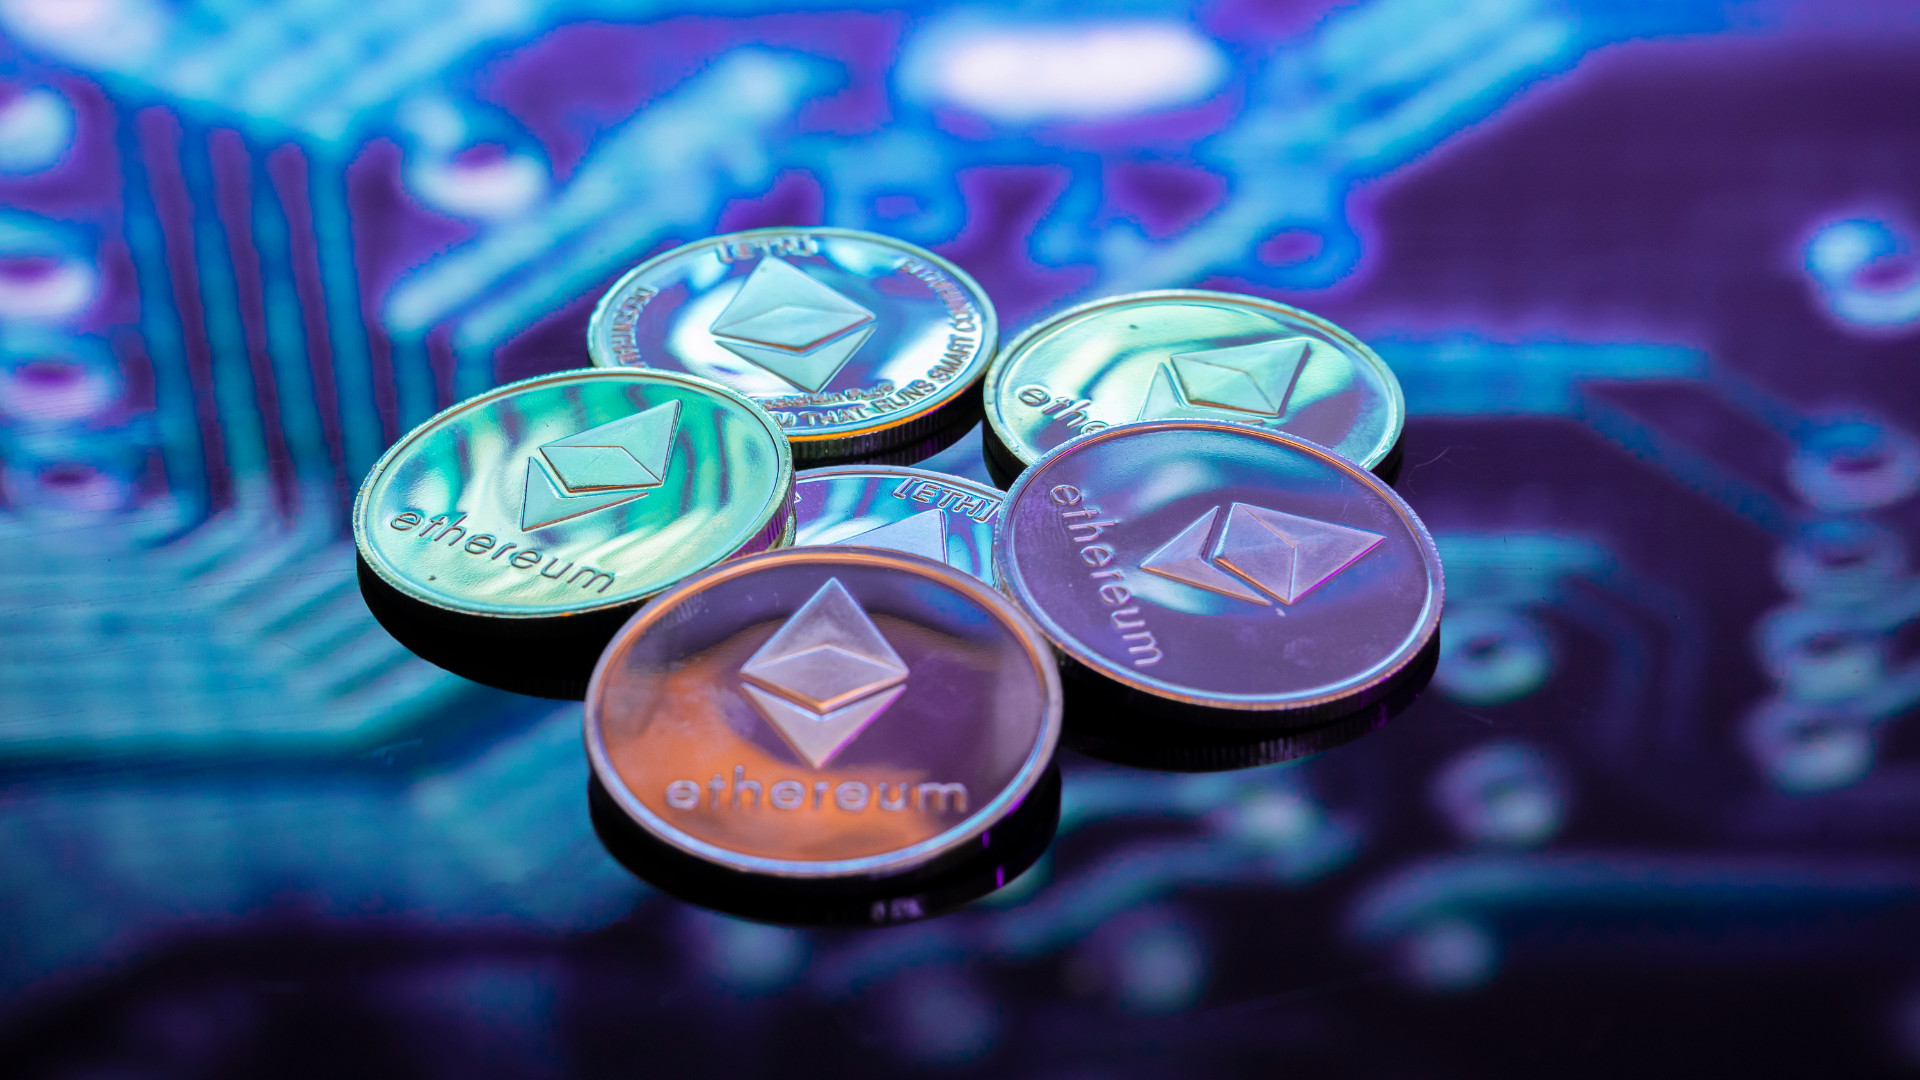 Six physical ethereum coins